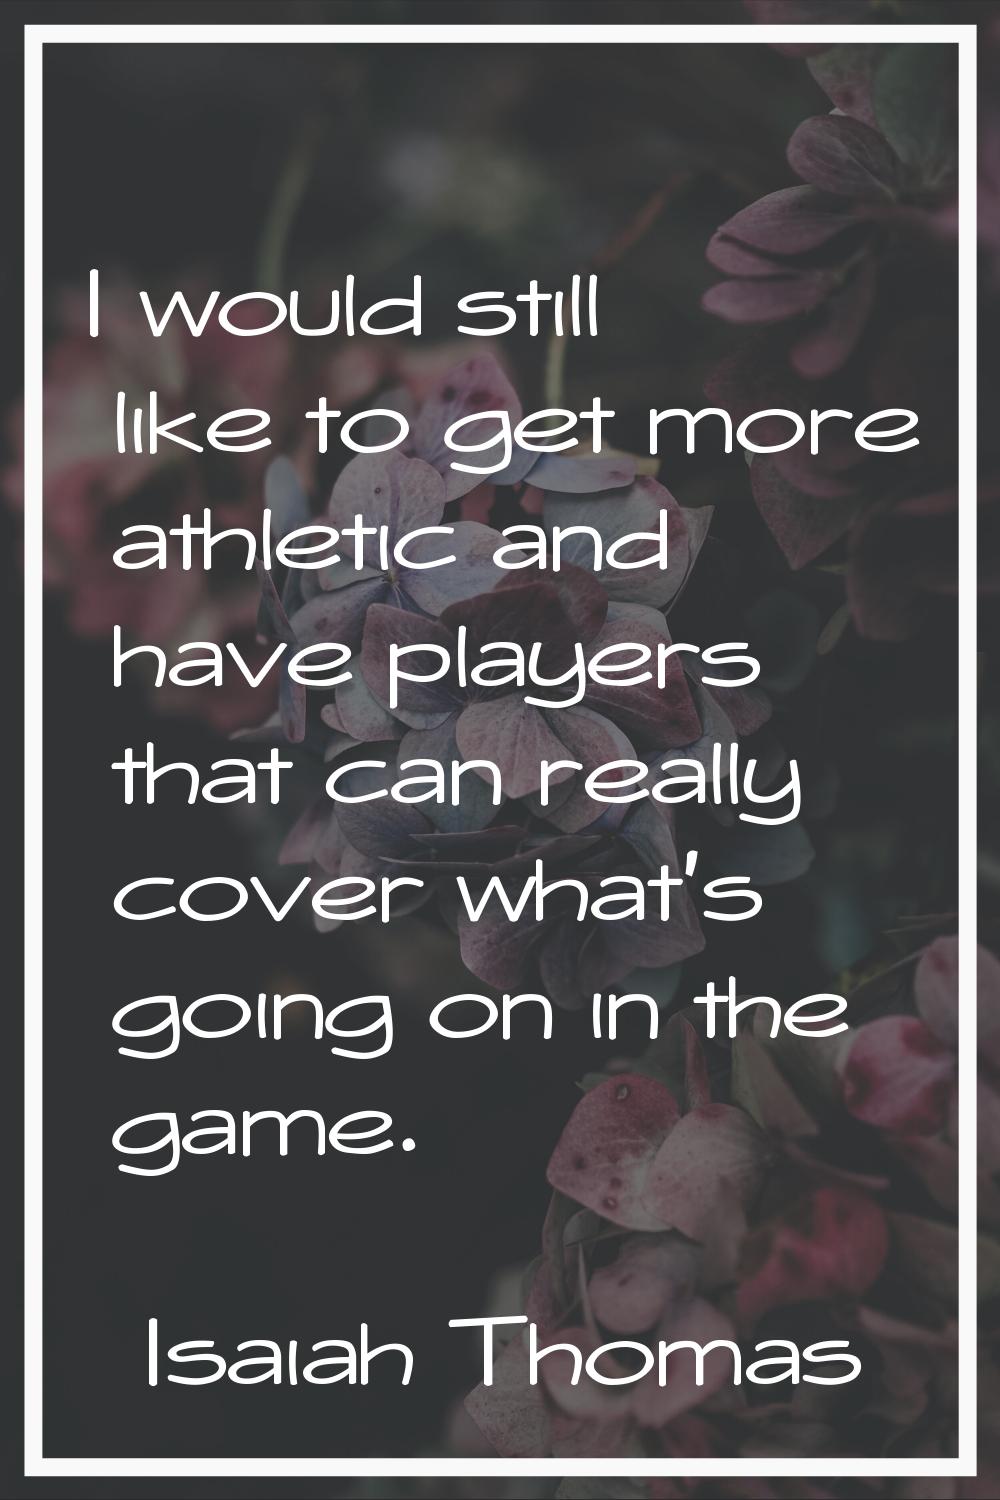 I would still like to get more athletic and have players that can really cover what's going on in t